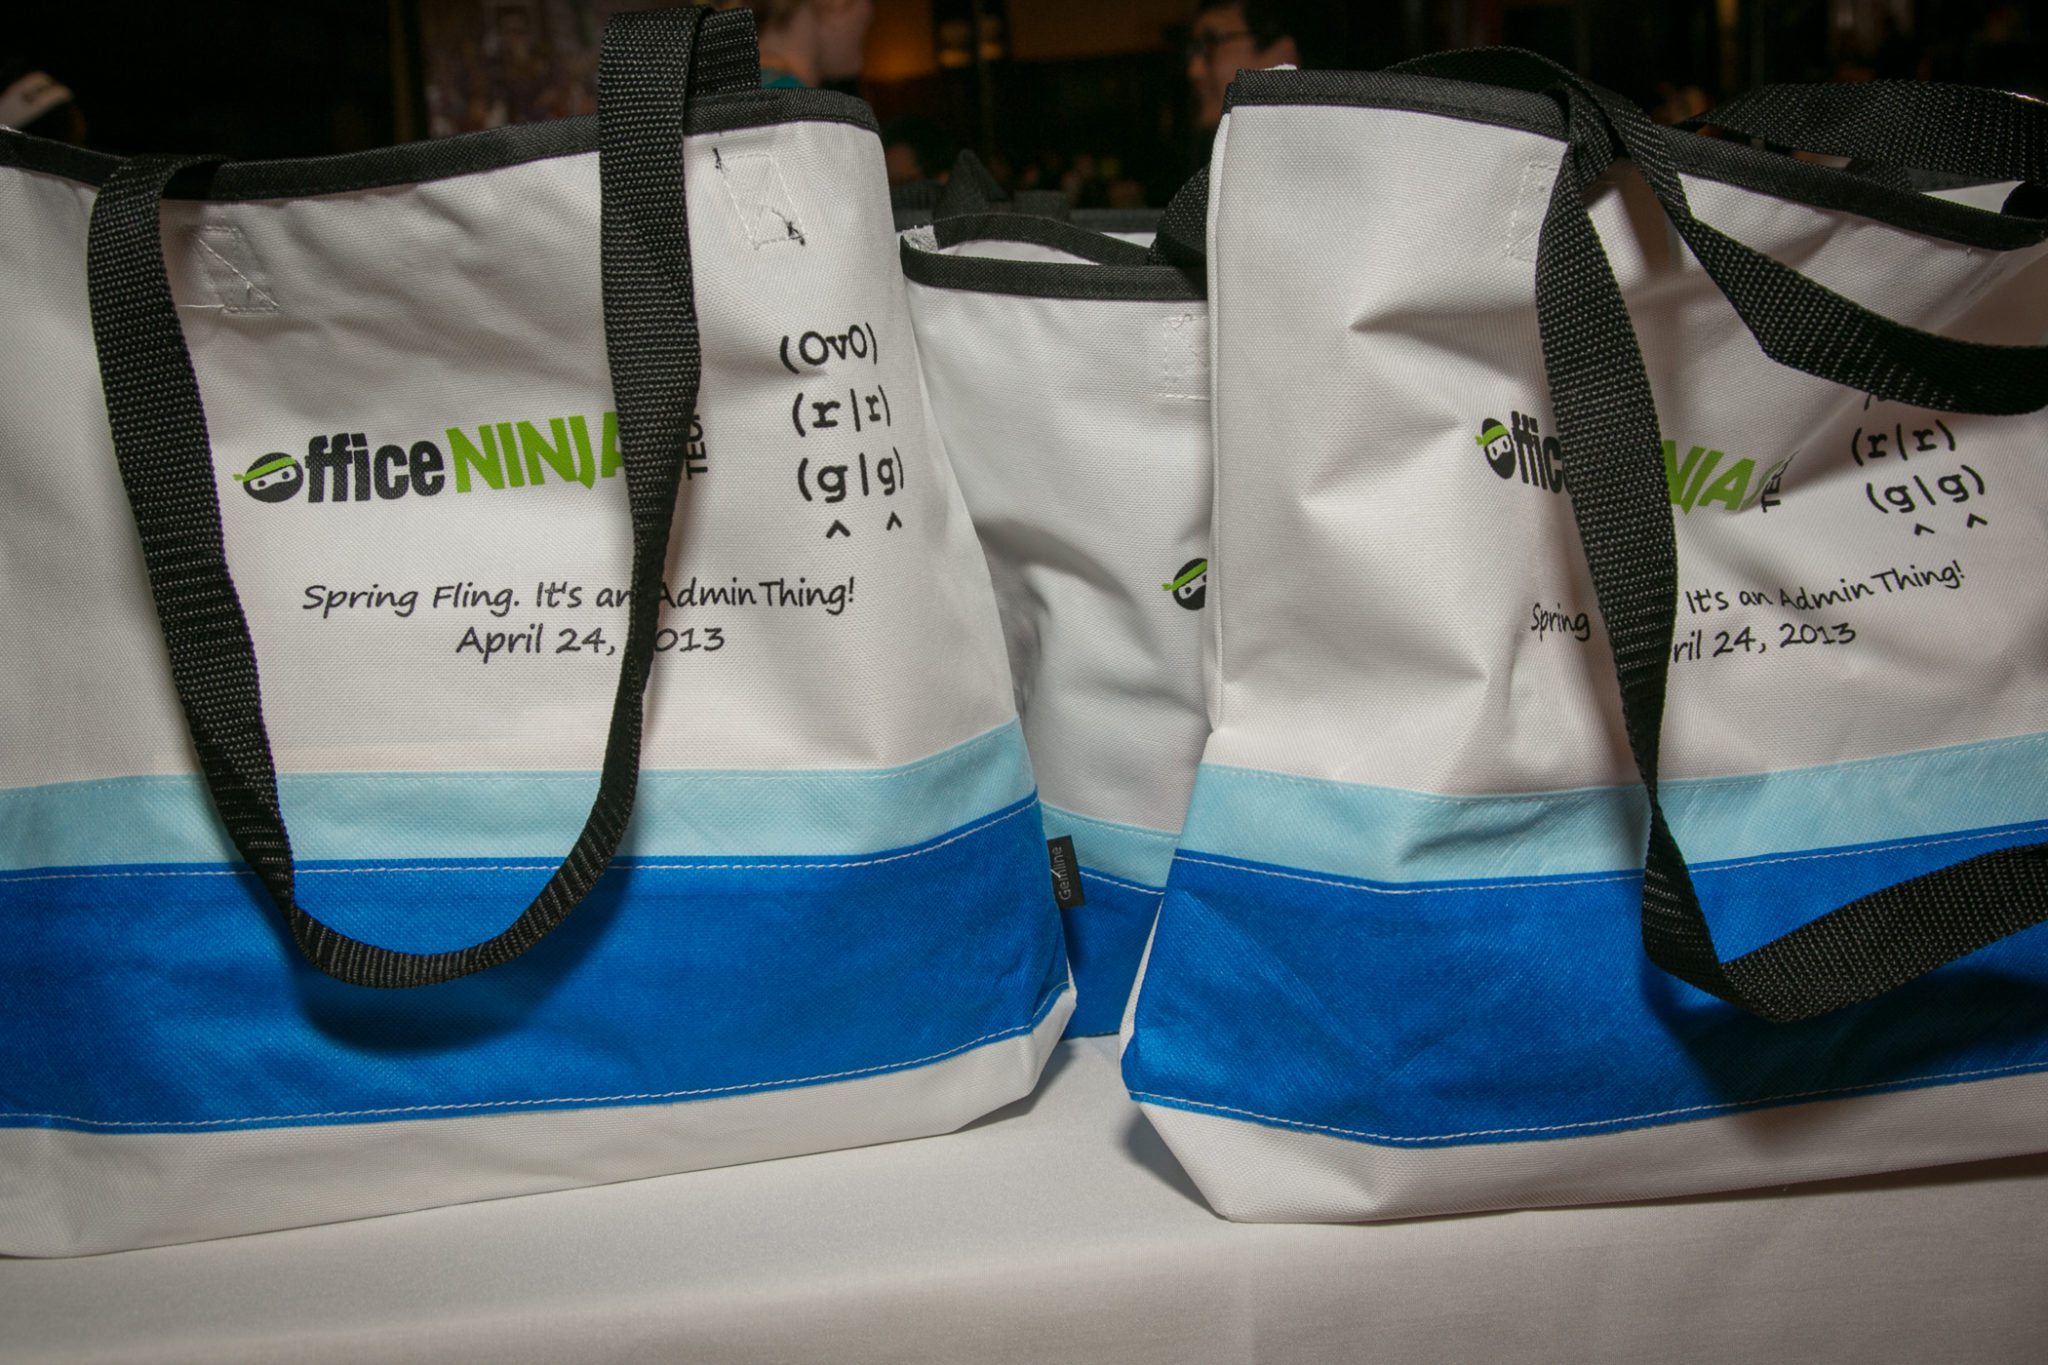 Our Rad Swag Bags!